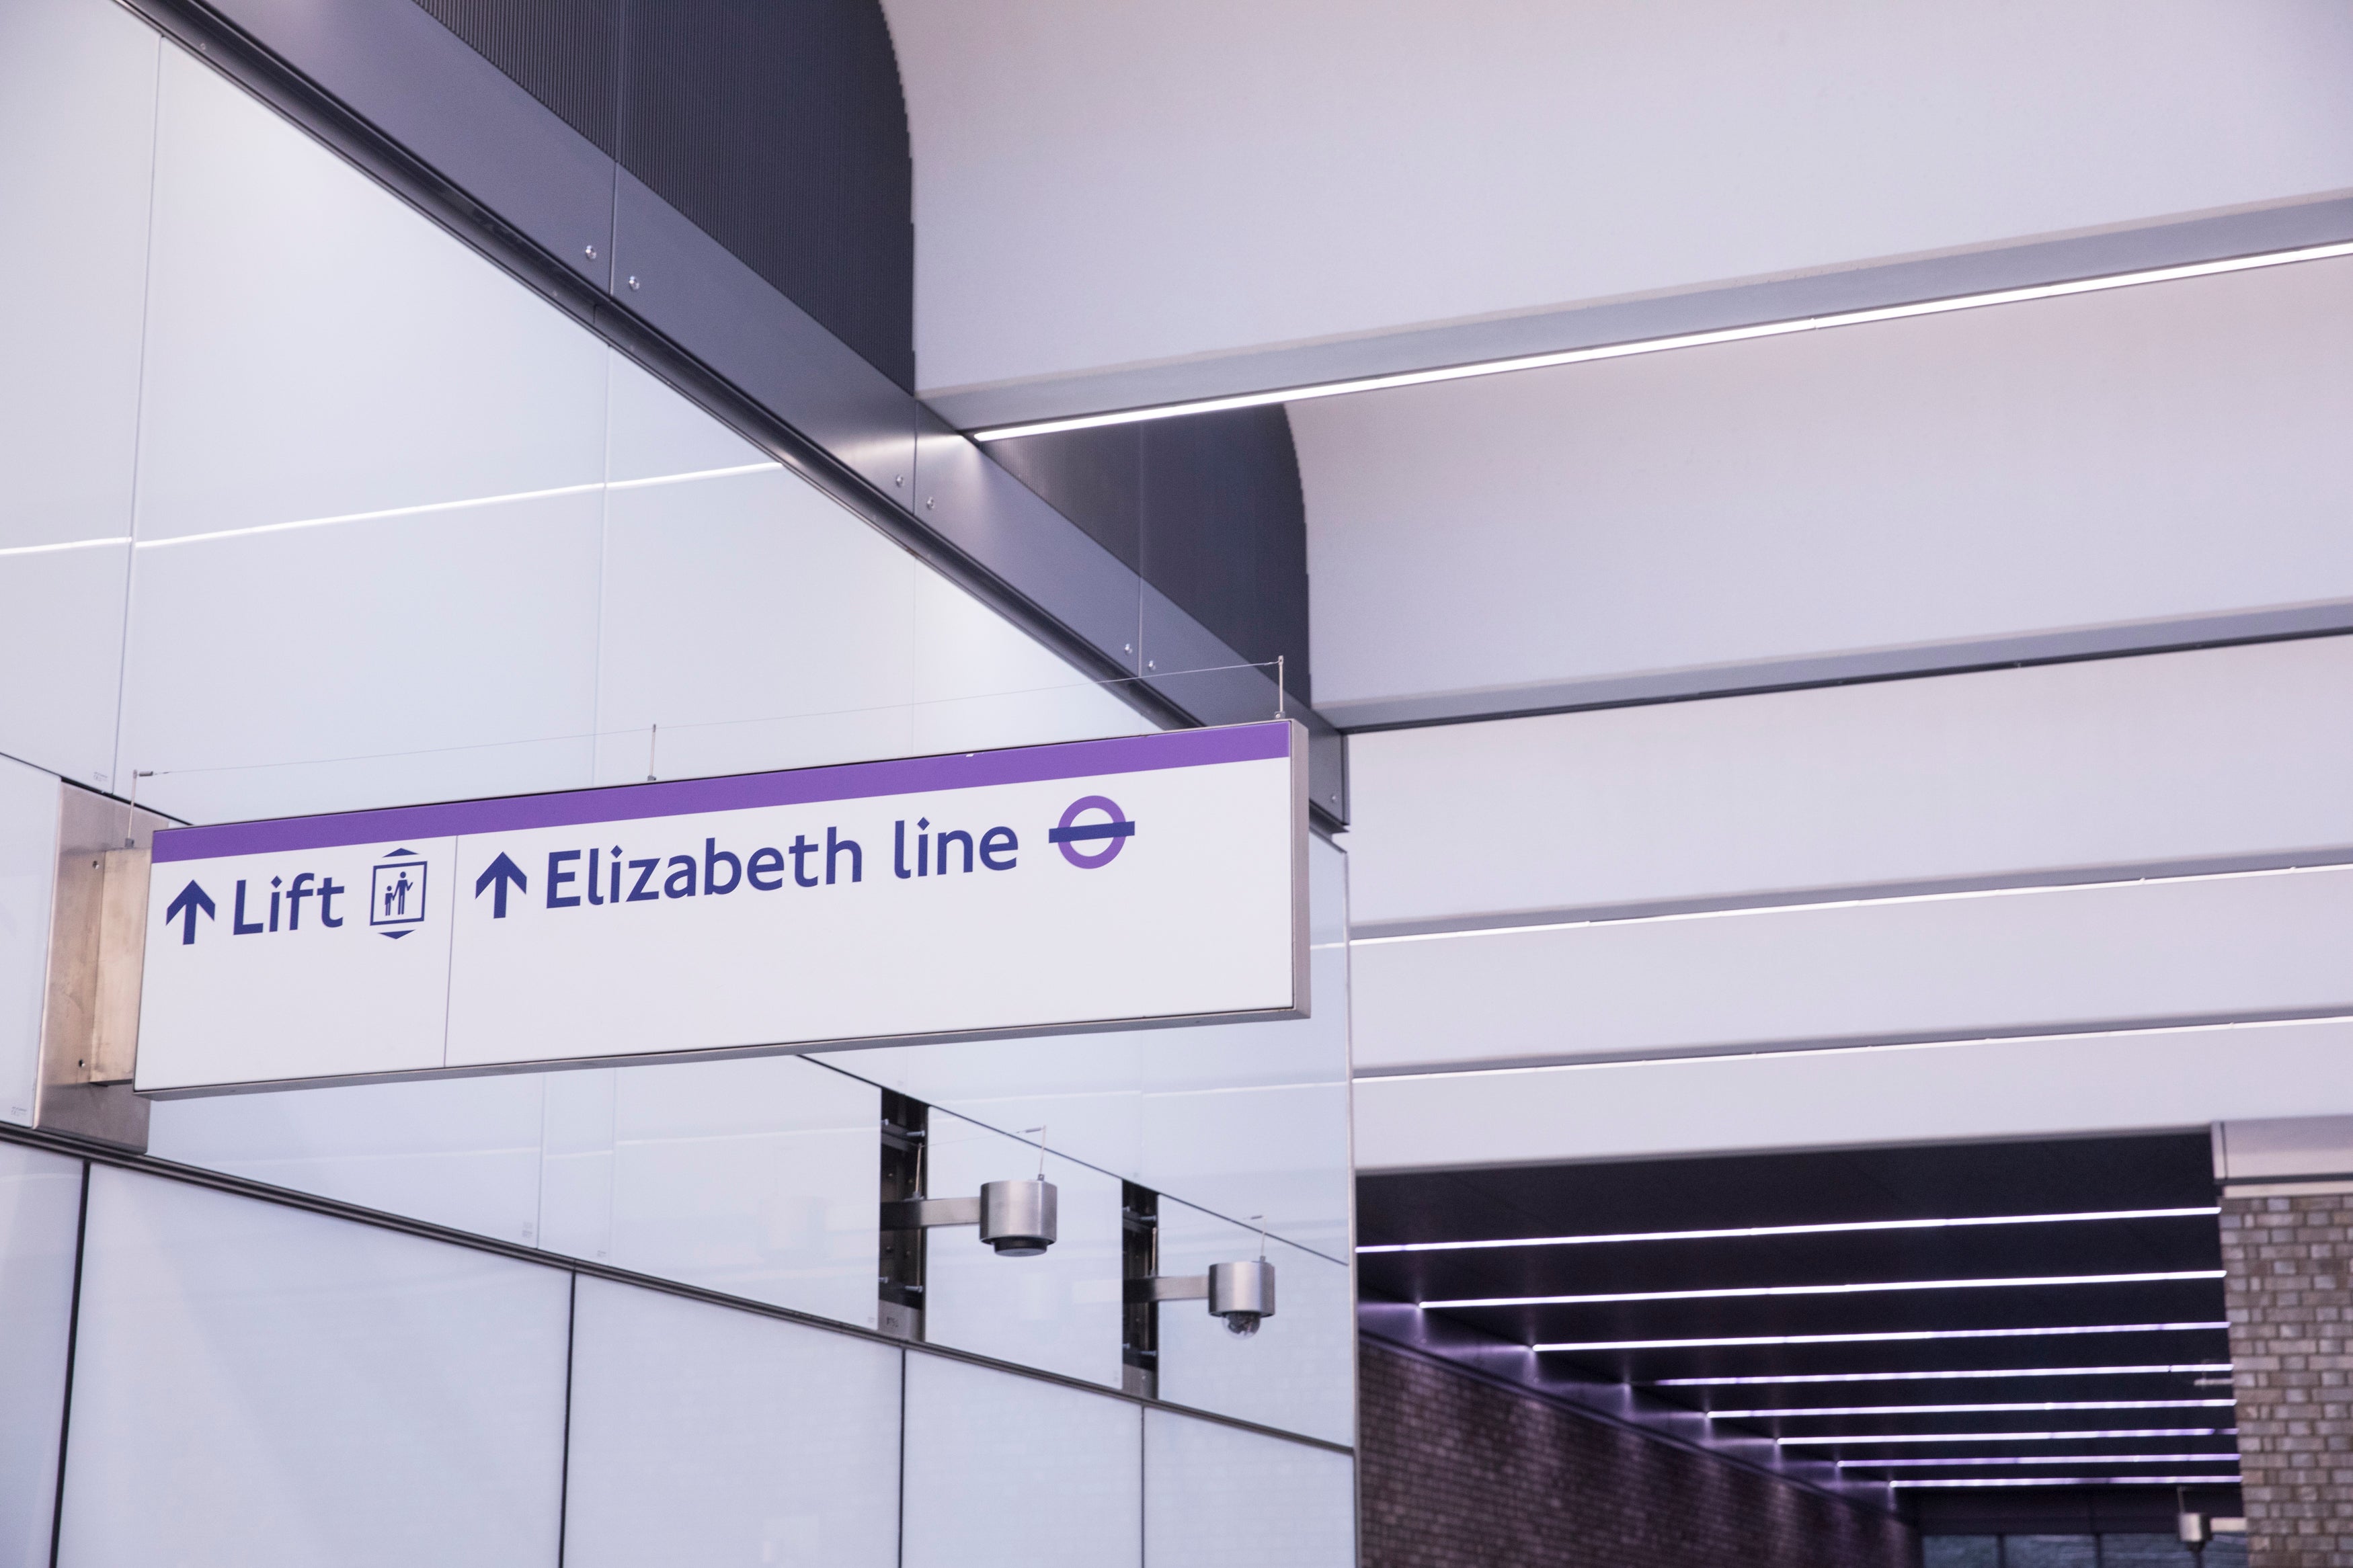 It will be known as the Elizabeth line once services begin (TfL/PA)